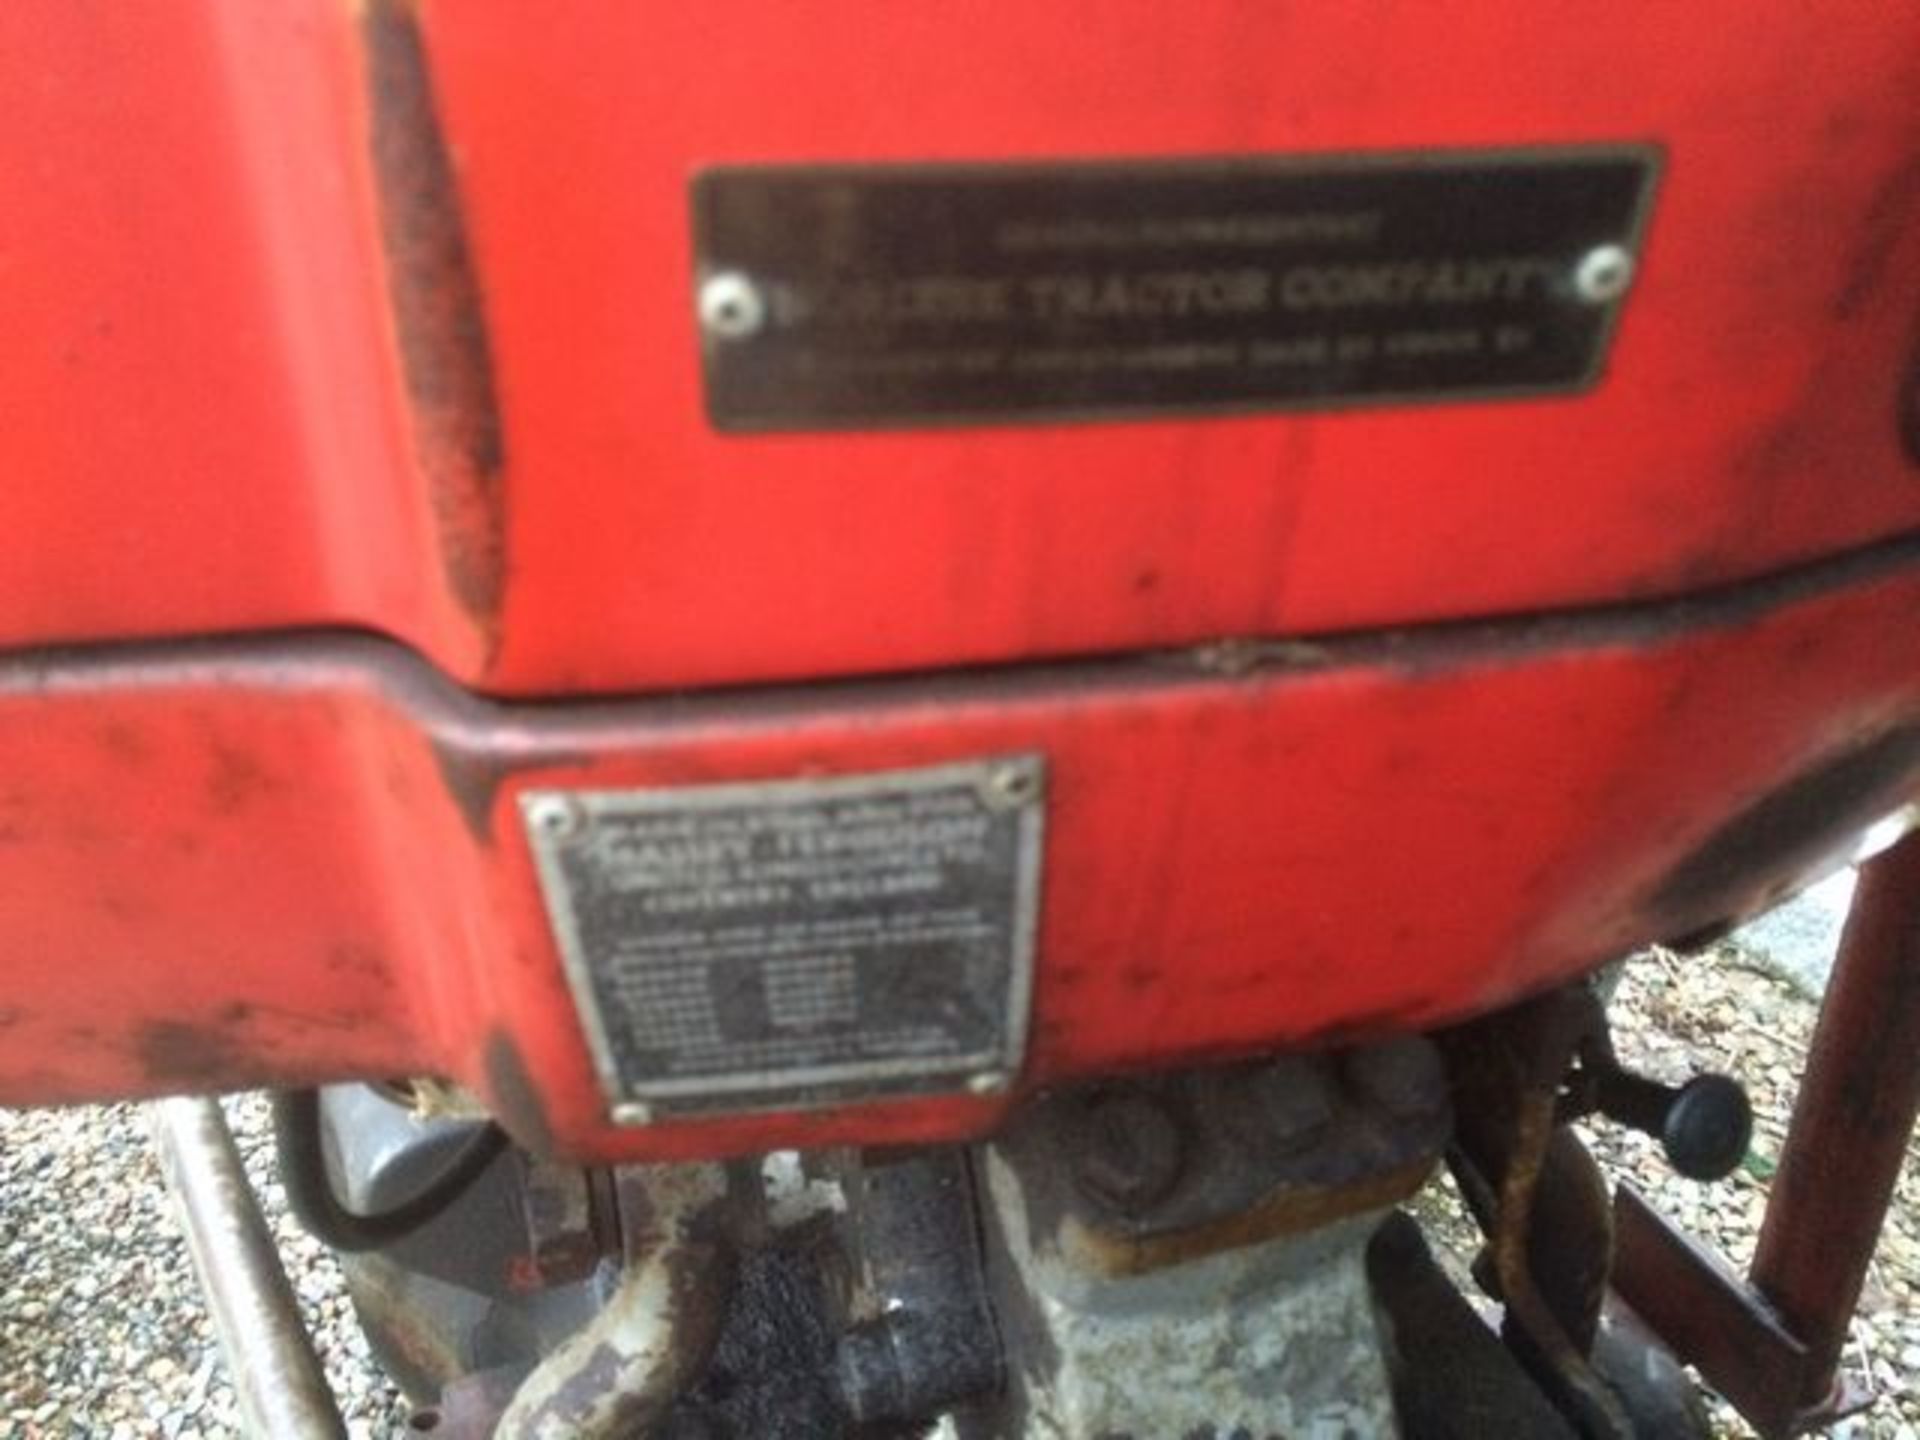 MASSEY FERGUSON Age unknown production ran between 1965 and 1975 this example shows 5506 hours - Image 6 of 12